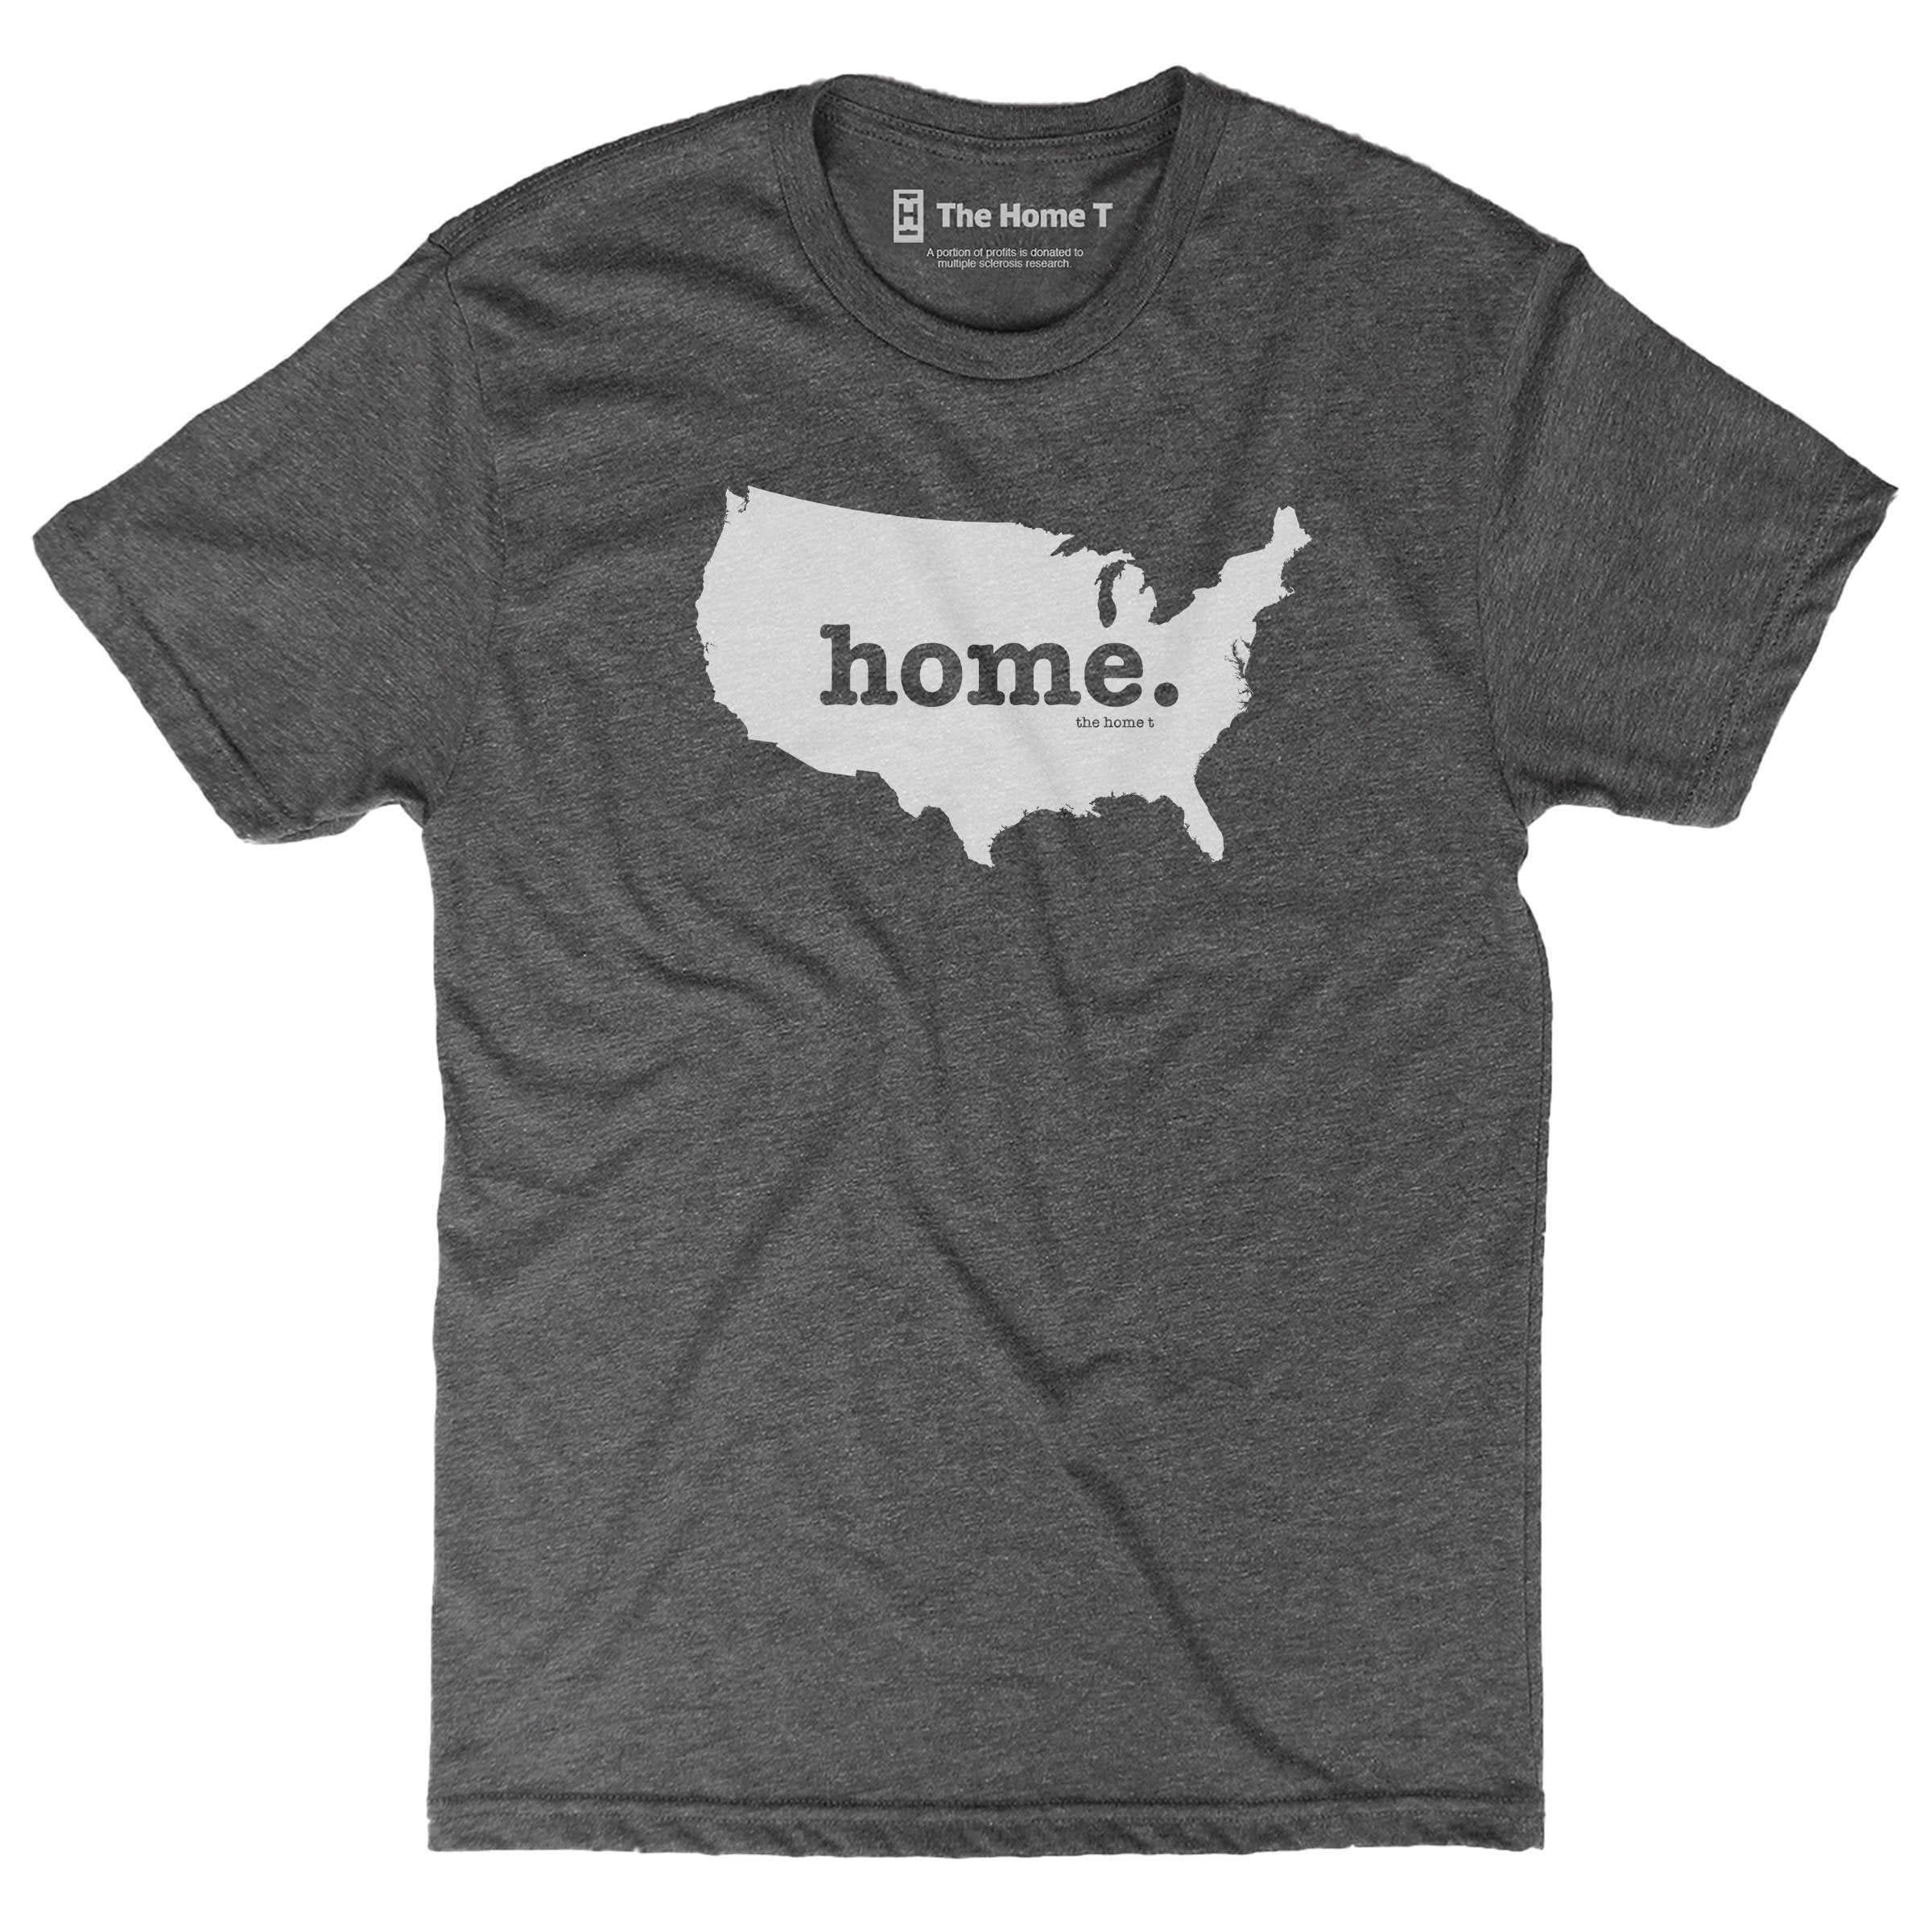 United States Home T Original Crew The Home T XXL Grey